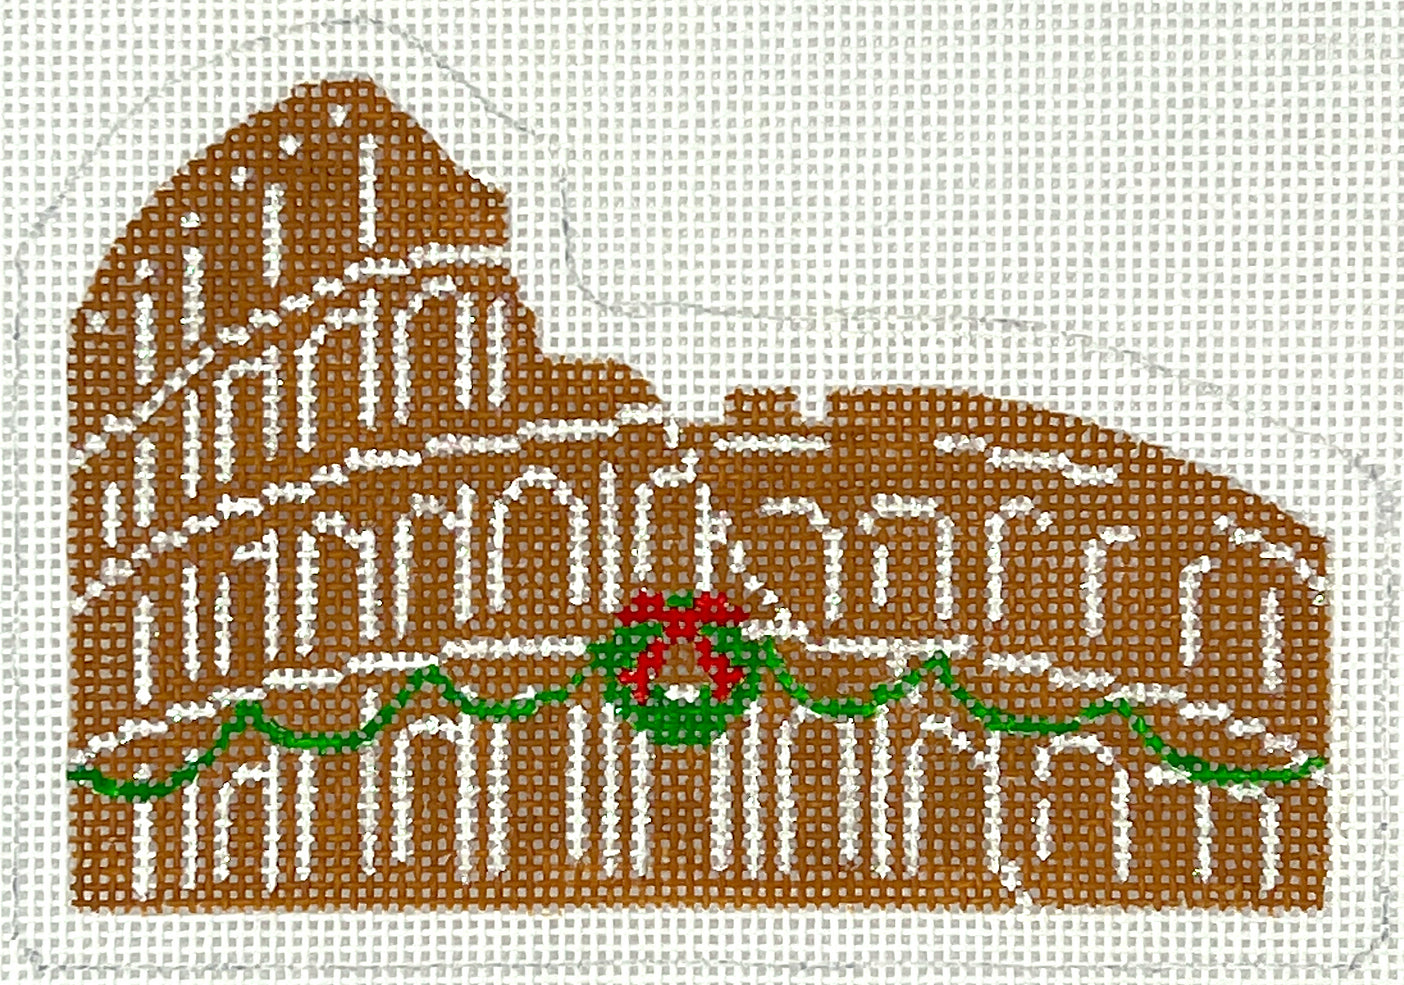 kate dickerson needlepoint canvas of the Colosseum in Rome, Italy made of gingerbread with Christmas garland and a wreath decorating it